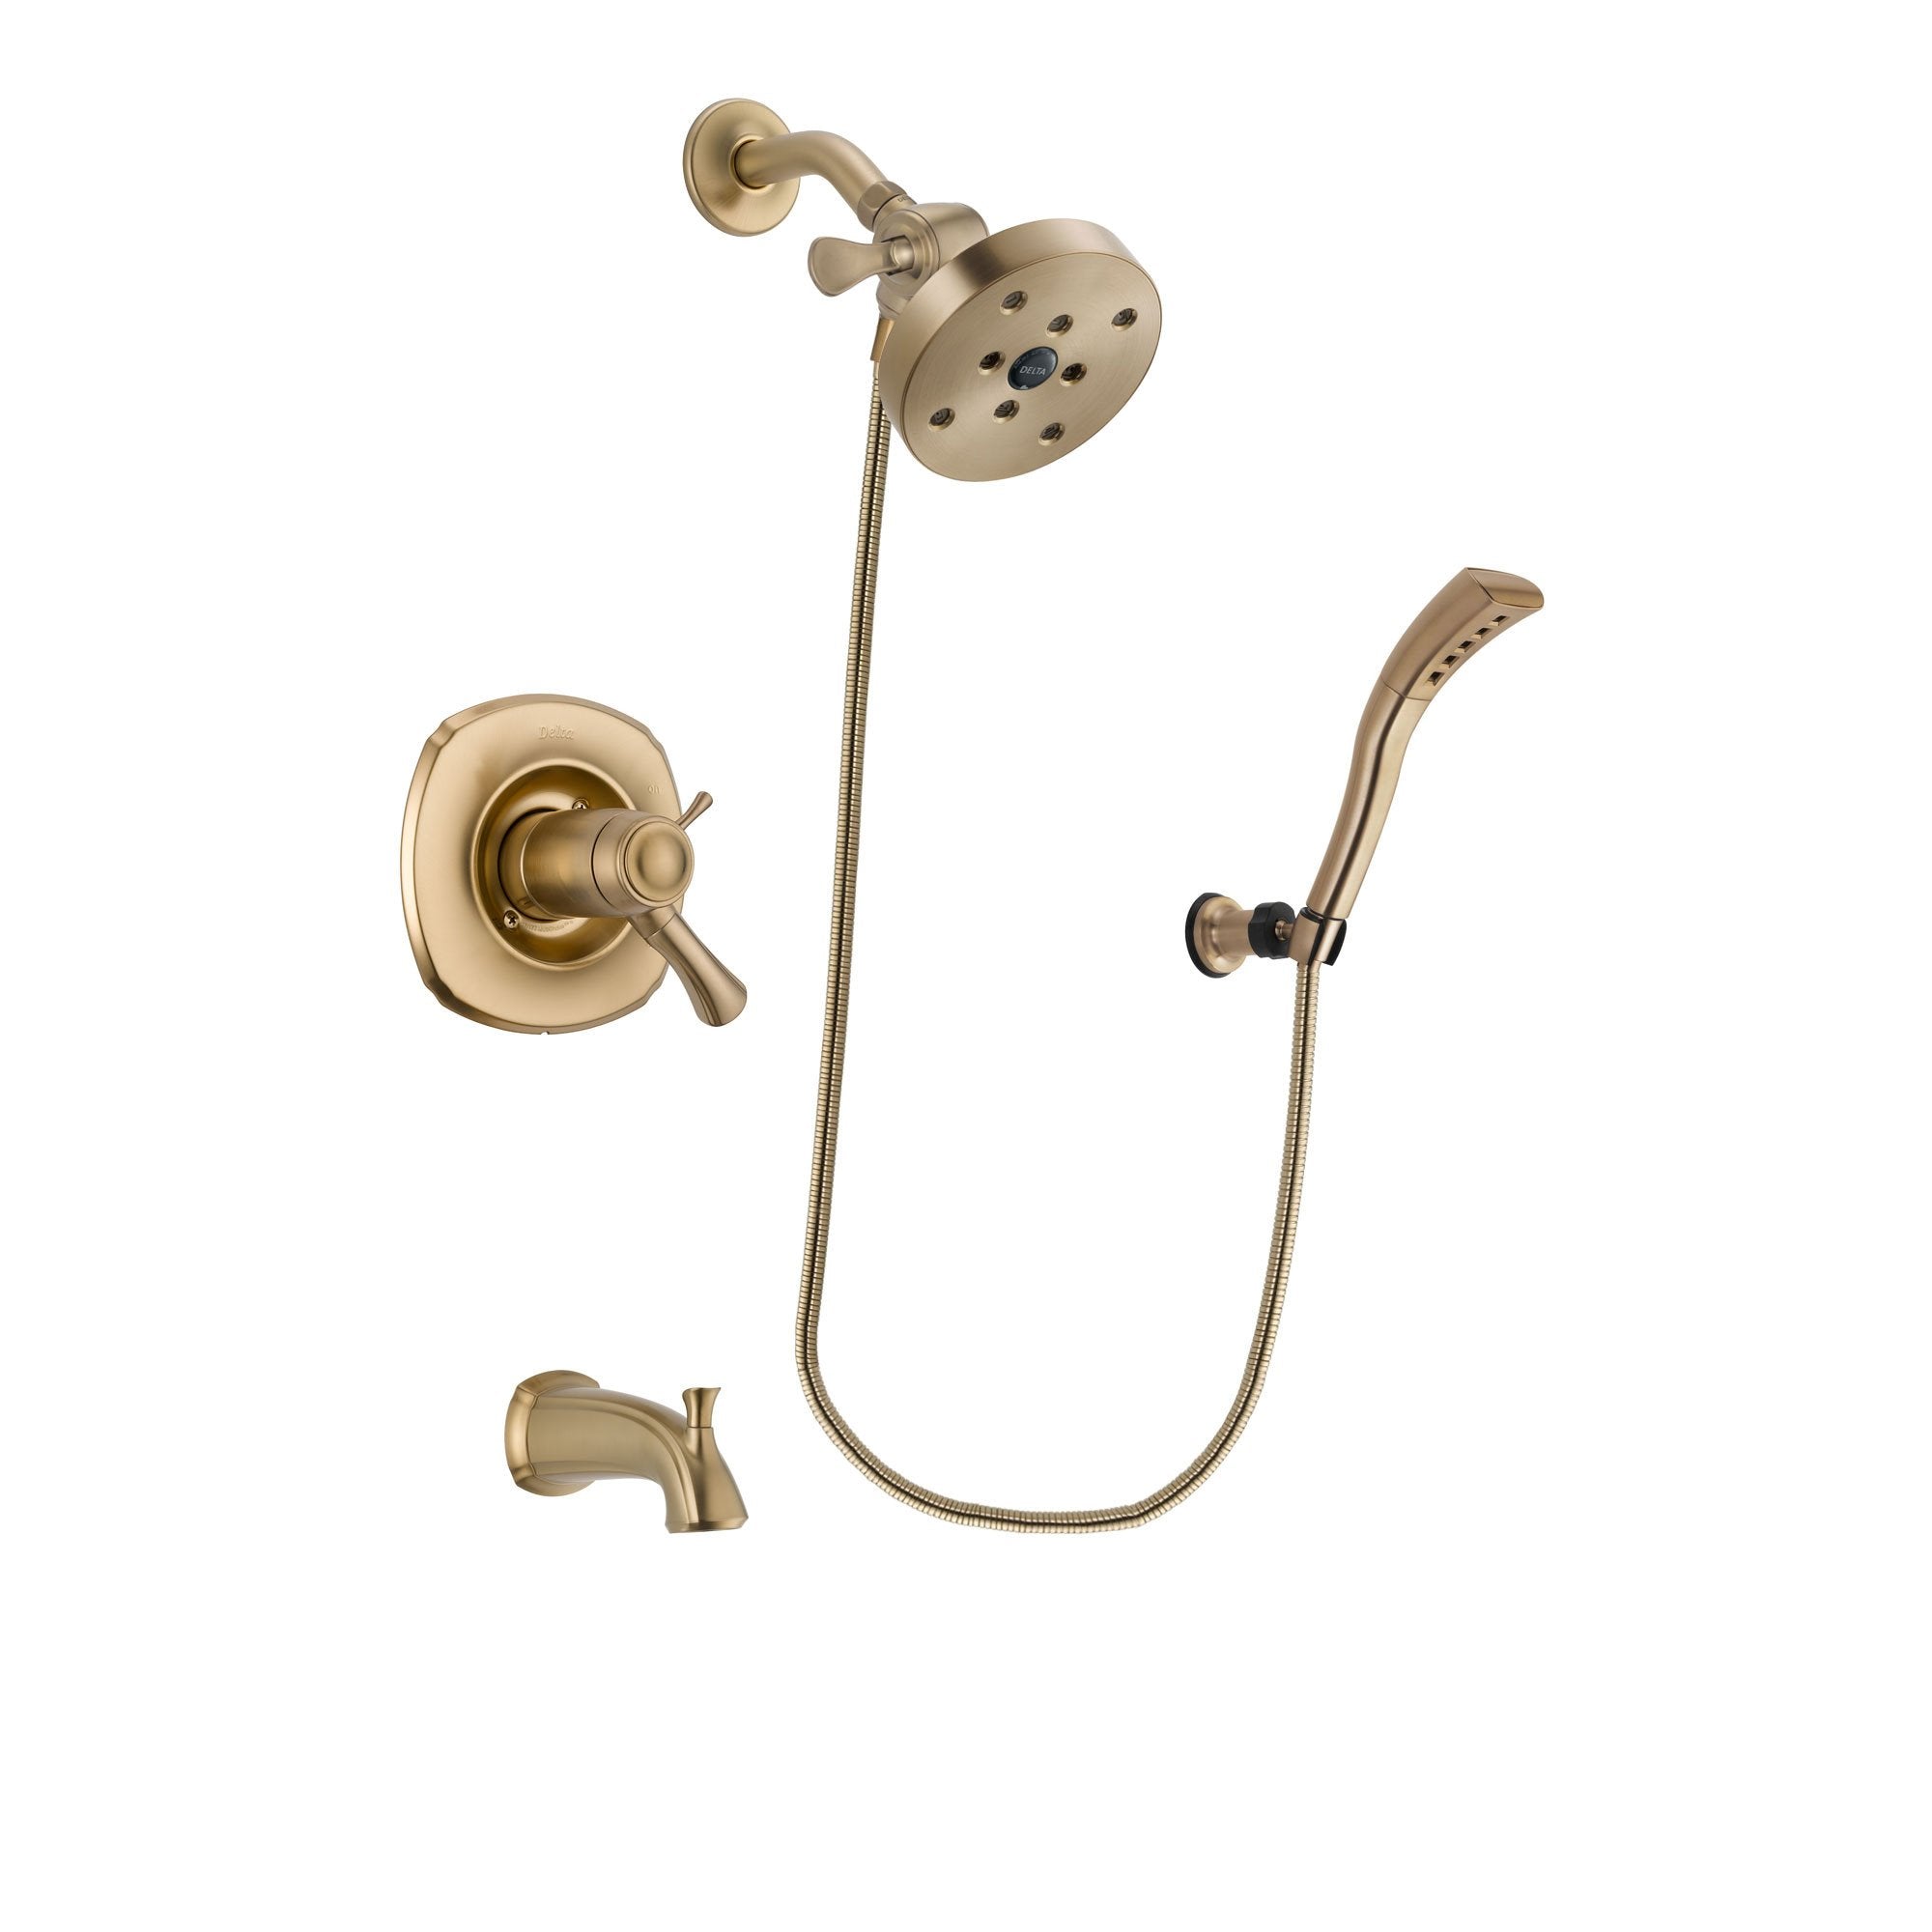 Delta Addison Champagne Bronze Finish Thermostatic Tub and Shower Faucet System Package with 5-1/2 inch Showerhead and Modern Wall Mount Personal Handheld Shower Spray Includes Rough-in Valve and Tub Spout DSP3711V